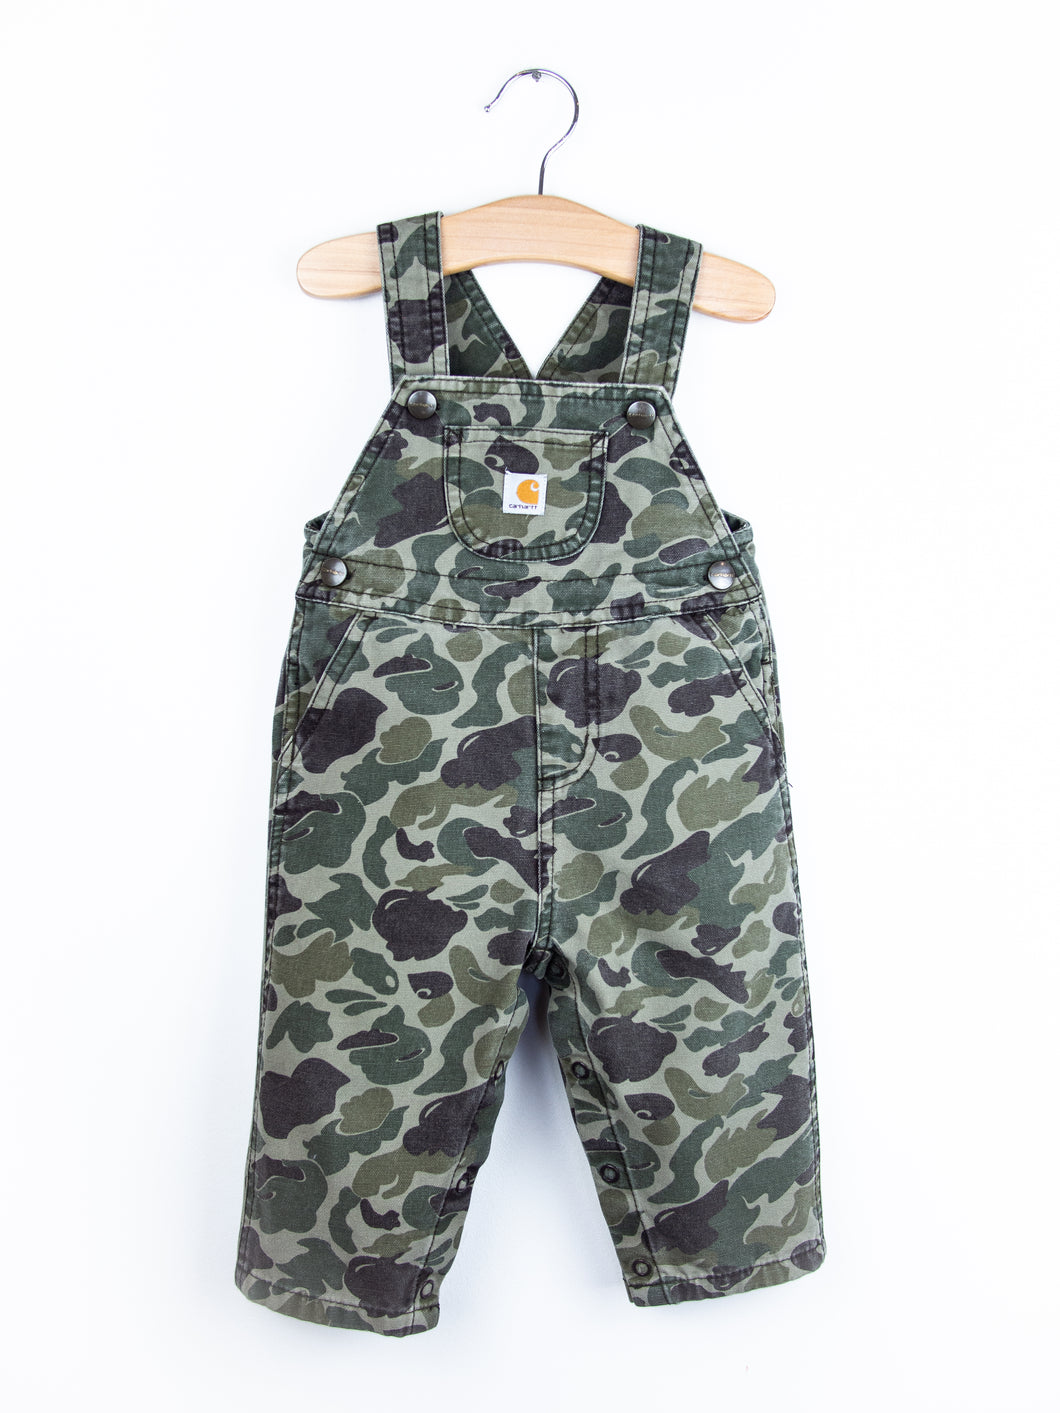 Carhartt Graphic Camo Dungarees - Age 9 months